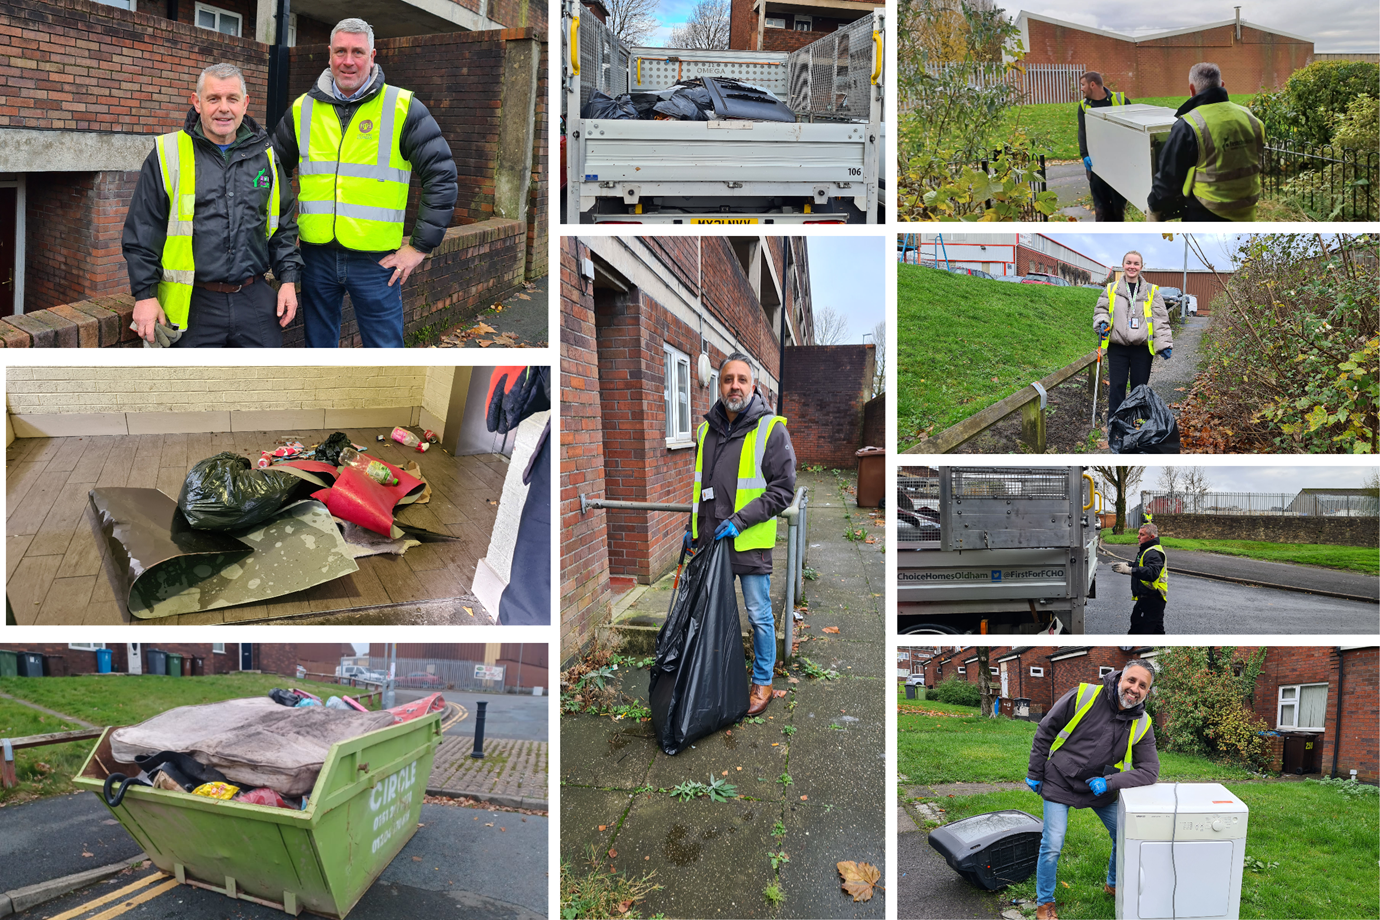 FCHO colleagues at Eldon community waste collection day, including free skips for locals to use and a litter pick